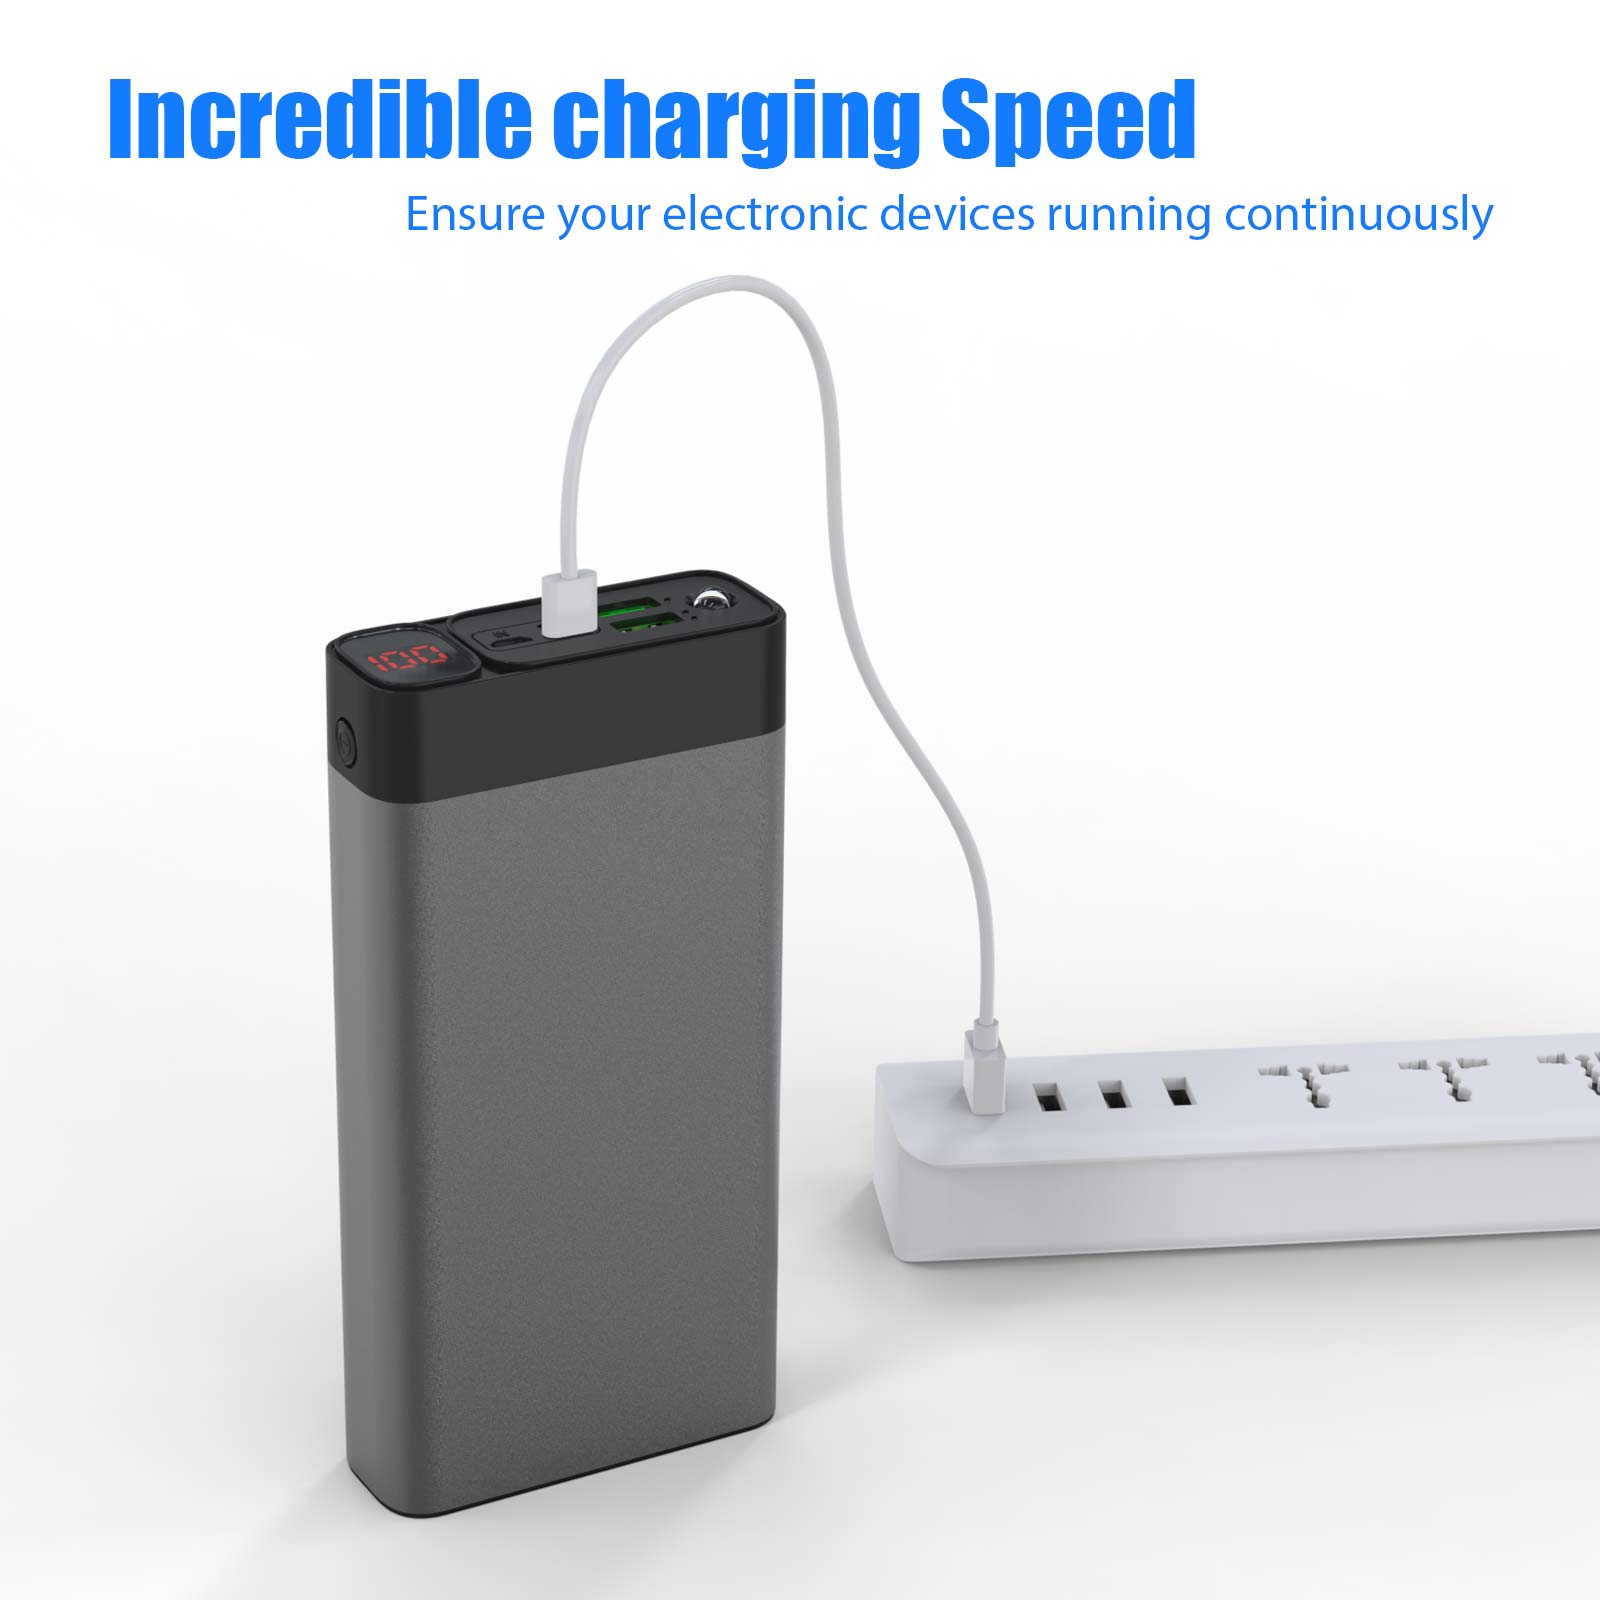 Toospon Power Bank 50000mAh High cost Safety Metal Shell QC 3.0 22.5W PD 20W Portable Phone Charger & Quick Charge Mobile Phones Tablet etc. External Battery